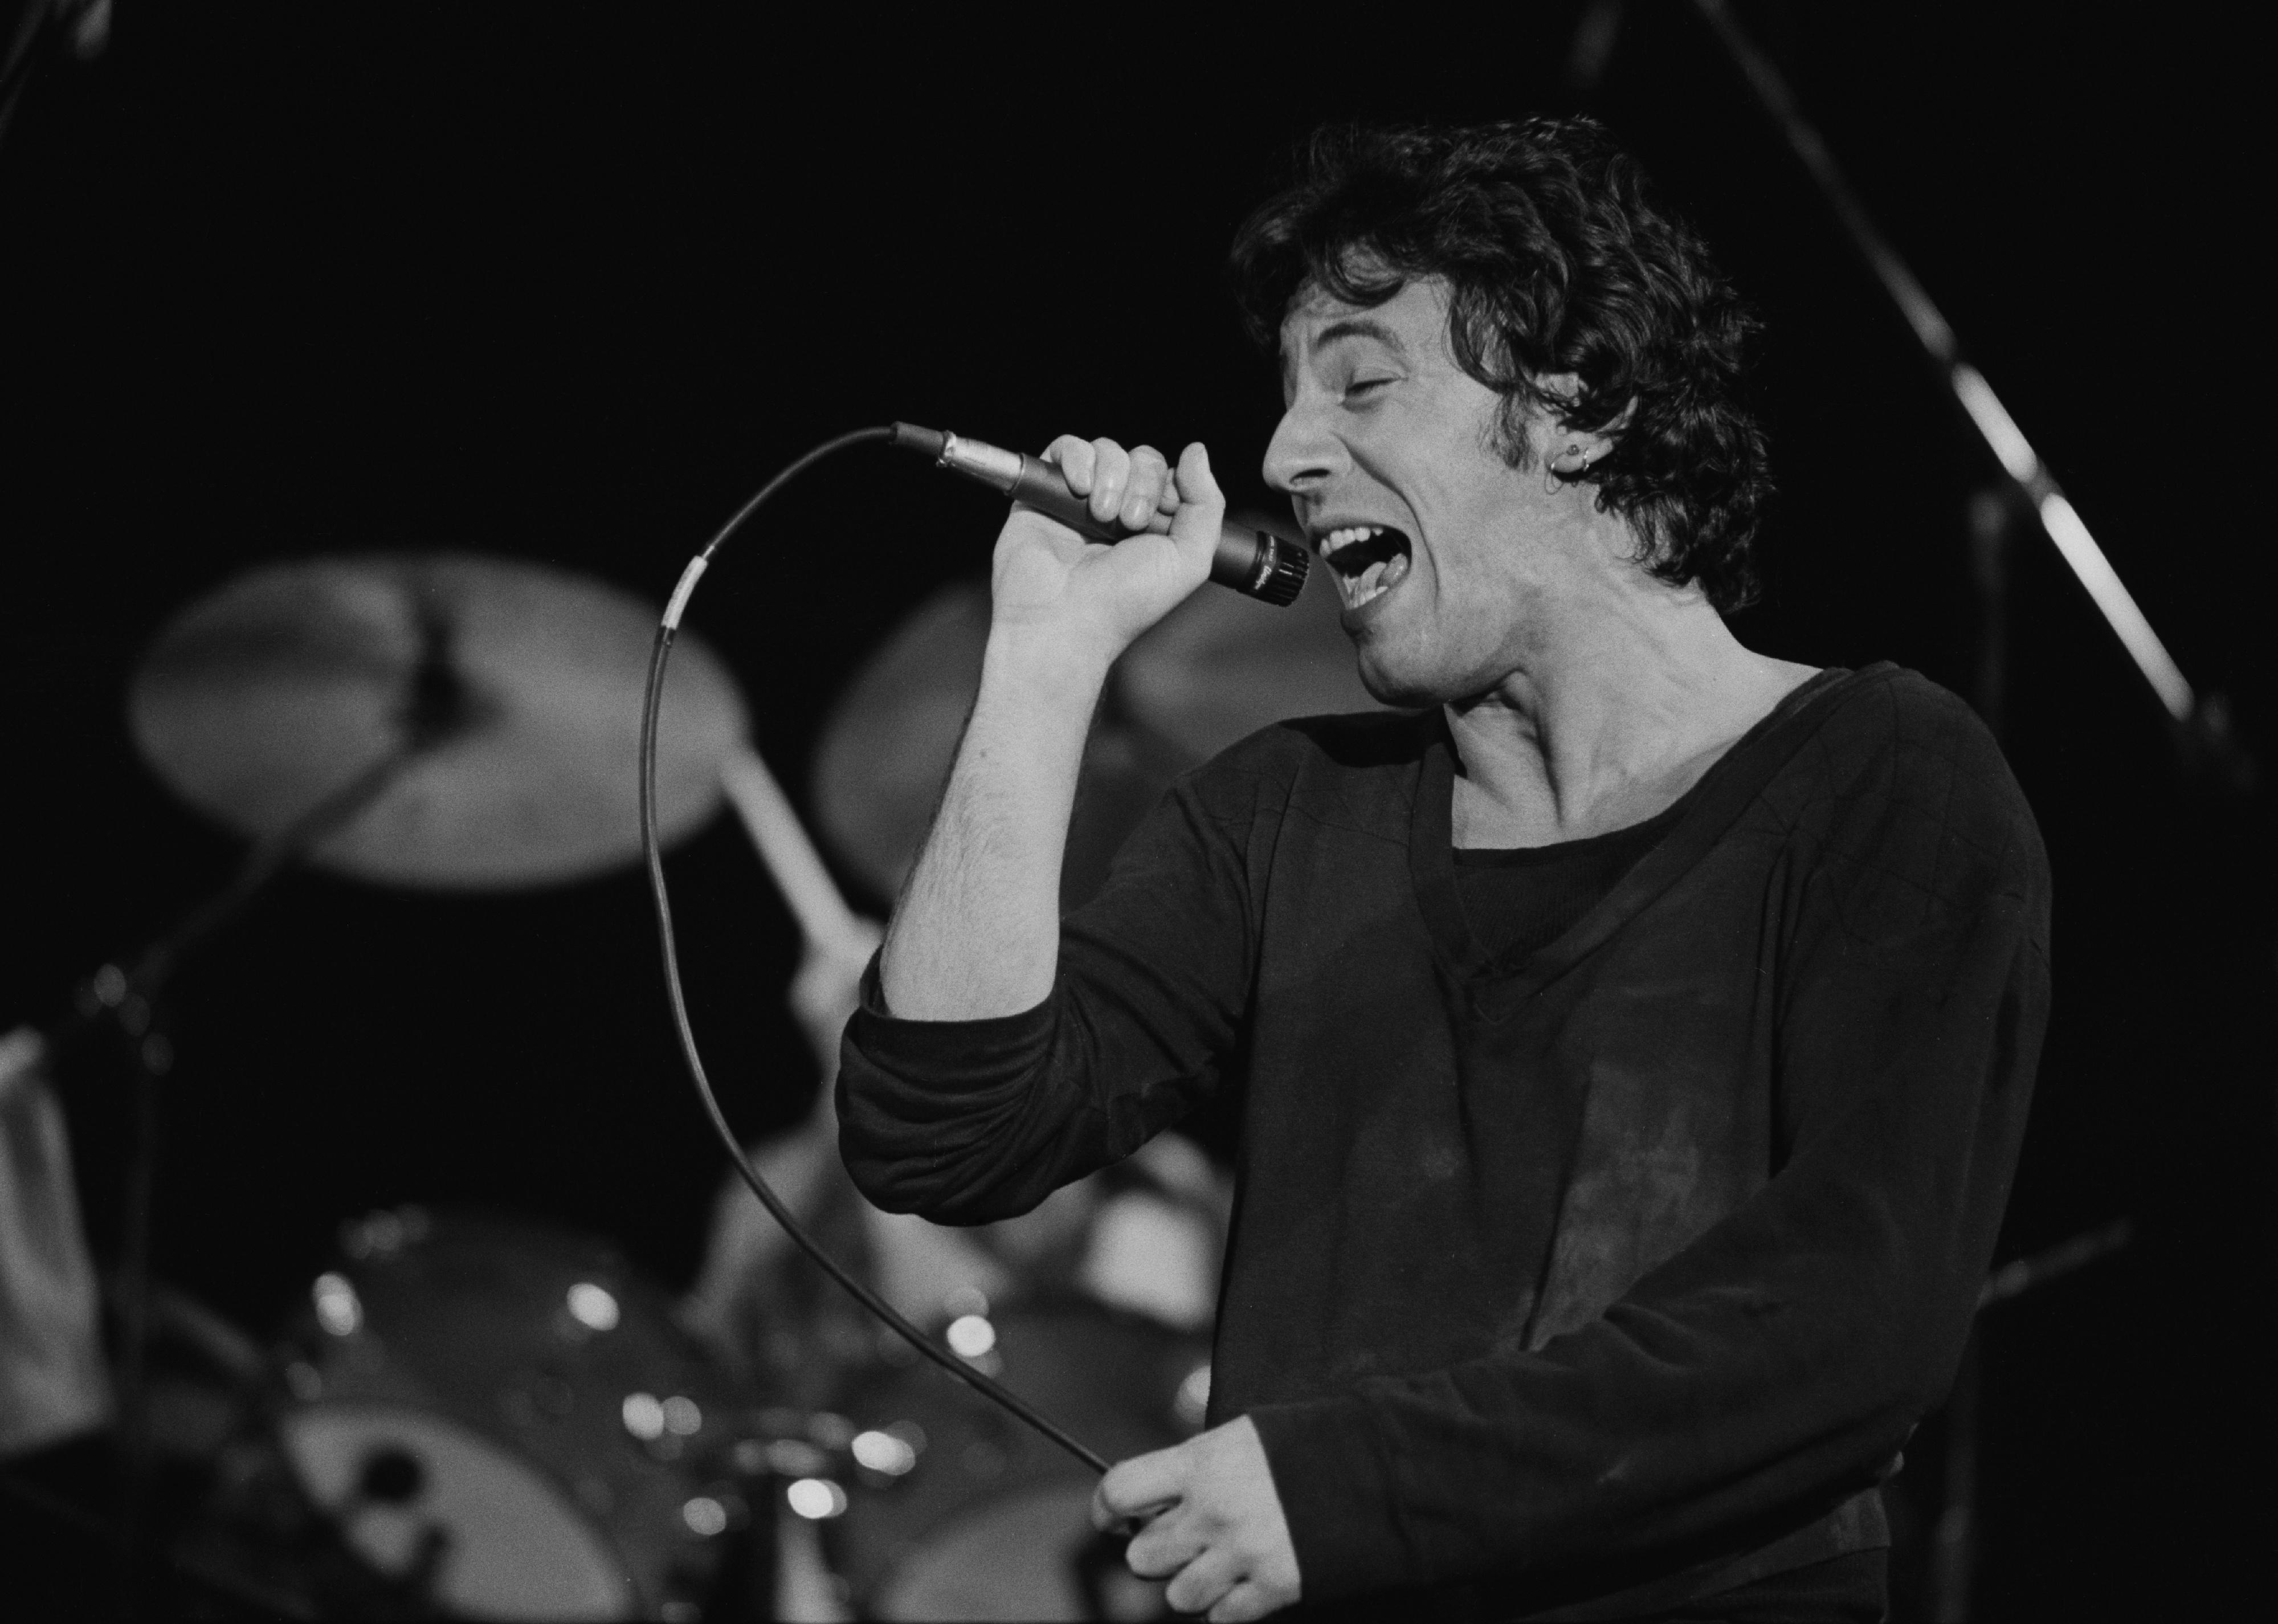 <p>Bruce Springsteen and the E Street Band fine-tuned their live act throughout the mid- and late 1970s, culminating with this historic concert. Many fans consider it to be The Boss' <a href="https://borntolisten.com/2020/09/19/september-19-bruce-springsteen-capitol-theatre-passaic-nj-1978-footage-with-sound-upgrade/">greatest live performance ever,</a> which is definitely no small feat. An official recording of the event was <a href="https://live.brucespringsteen.net/live-music/0,22963/Bruce-Springsteen---The-E-Street-Band-mp3-flac-download-9-19-1978-Capitol-Theatre-Passaic-NJ.html">recently made available</a> via the Live Bruce Springsteen website.</p>